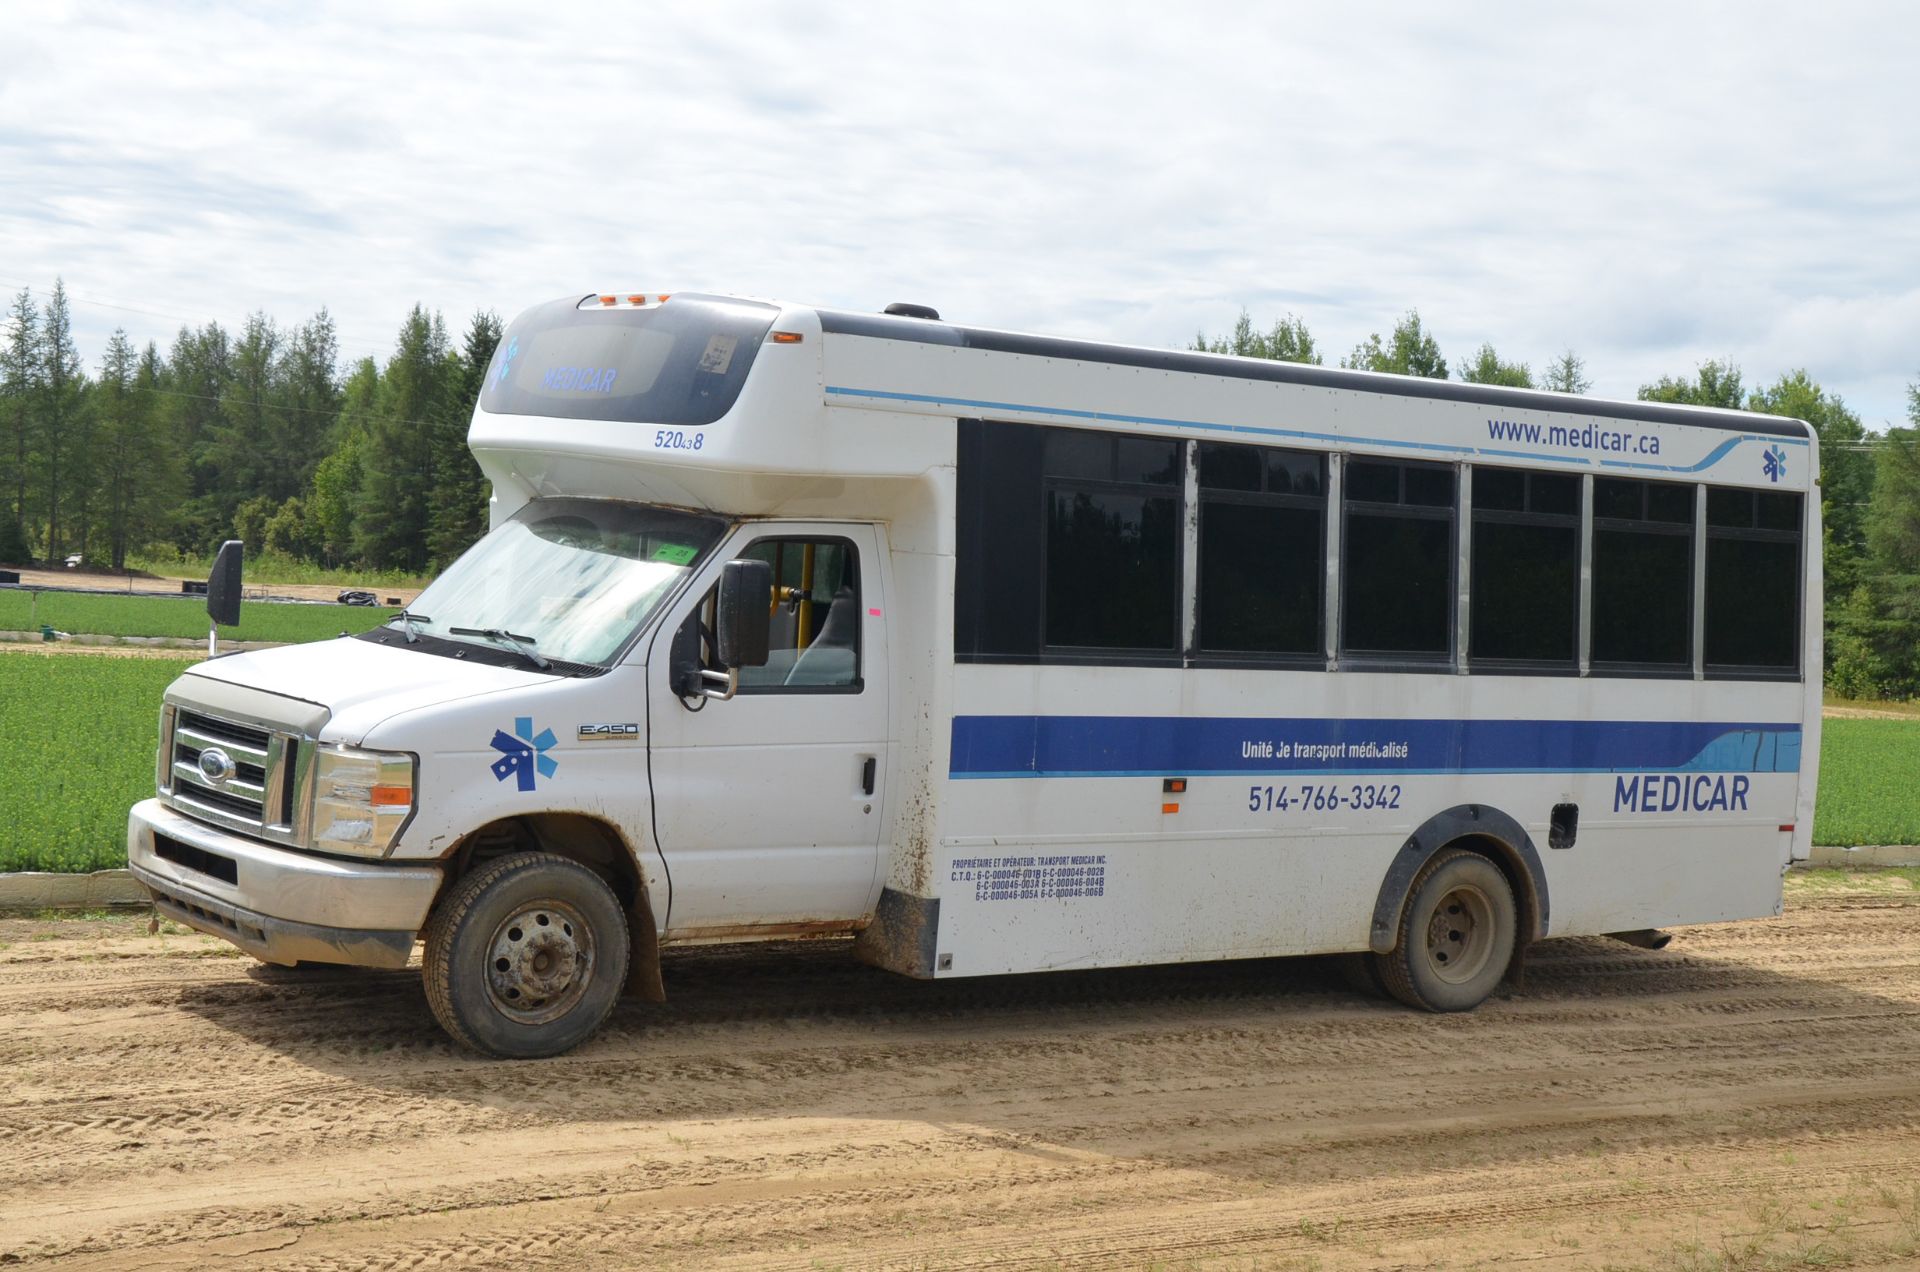 FORD (2008) E450 GIRARDIN CTV G5 (16) PASSENGER BUS WITH 6.0LITER DIESEL ENGINE, AUTOMATIC - Image 2 of 9